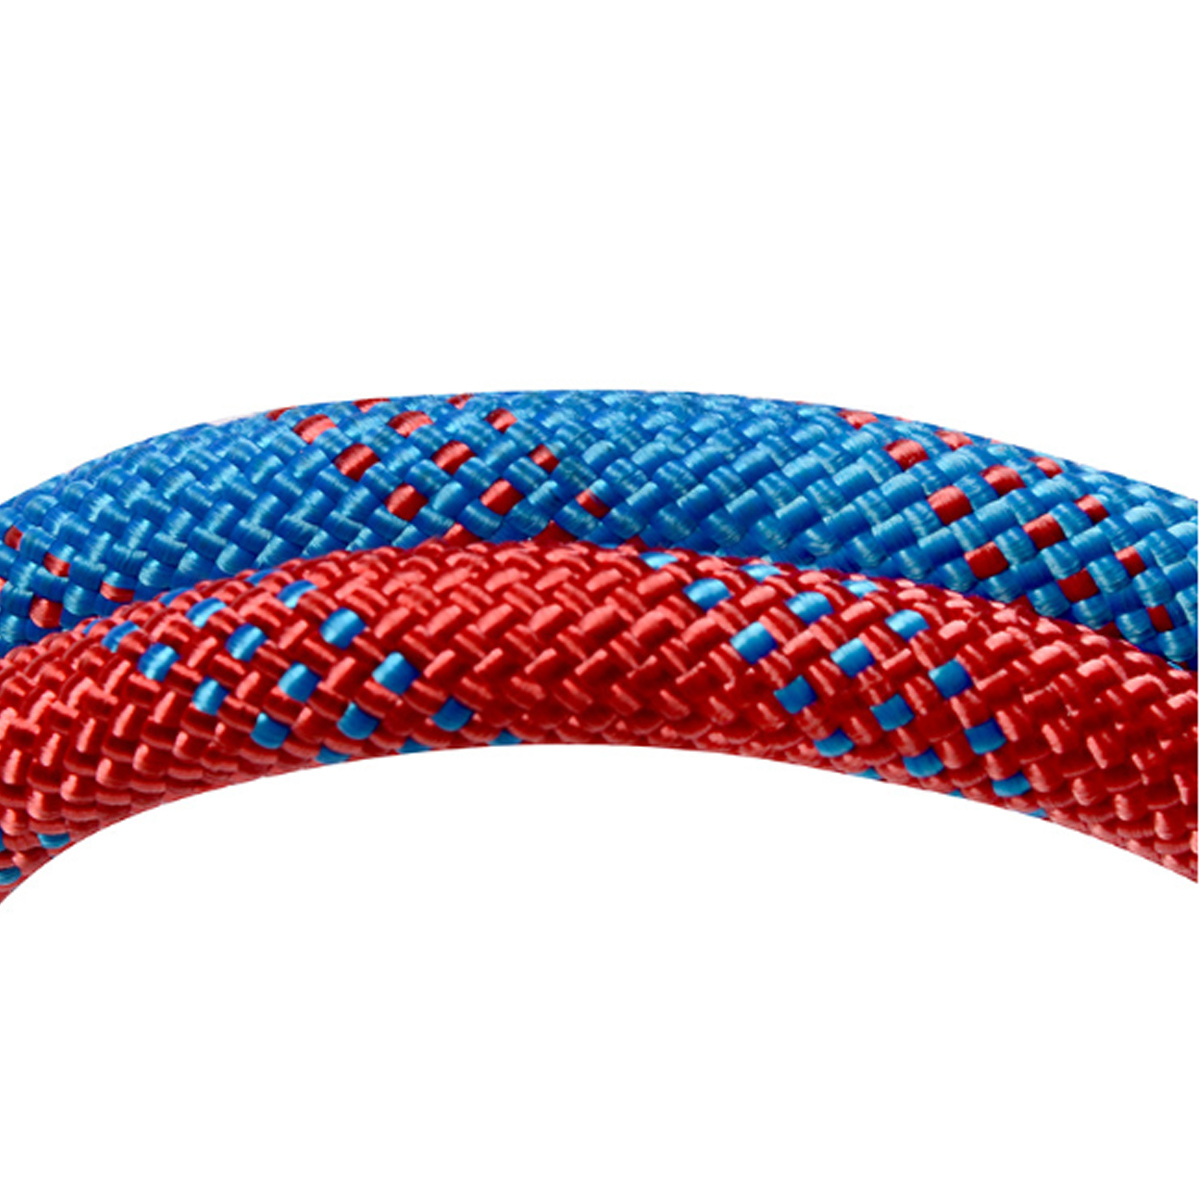 10mx10mm-Double-Buckle-Rock-Climbing-Rope-Outdoor-Sports-Hiking-Climbing-Downhill-Safety-Rope-1537631-5